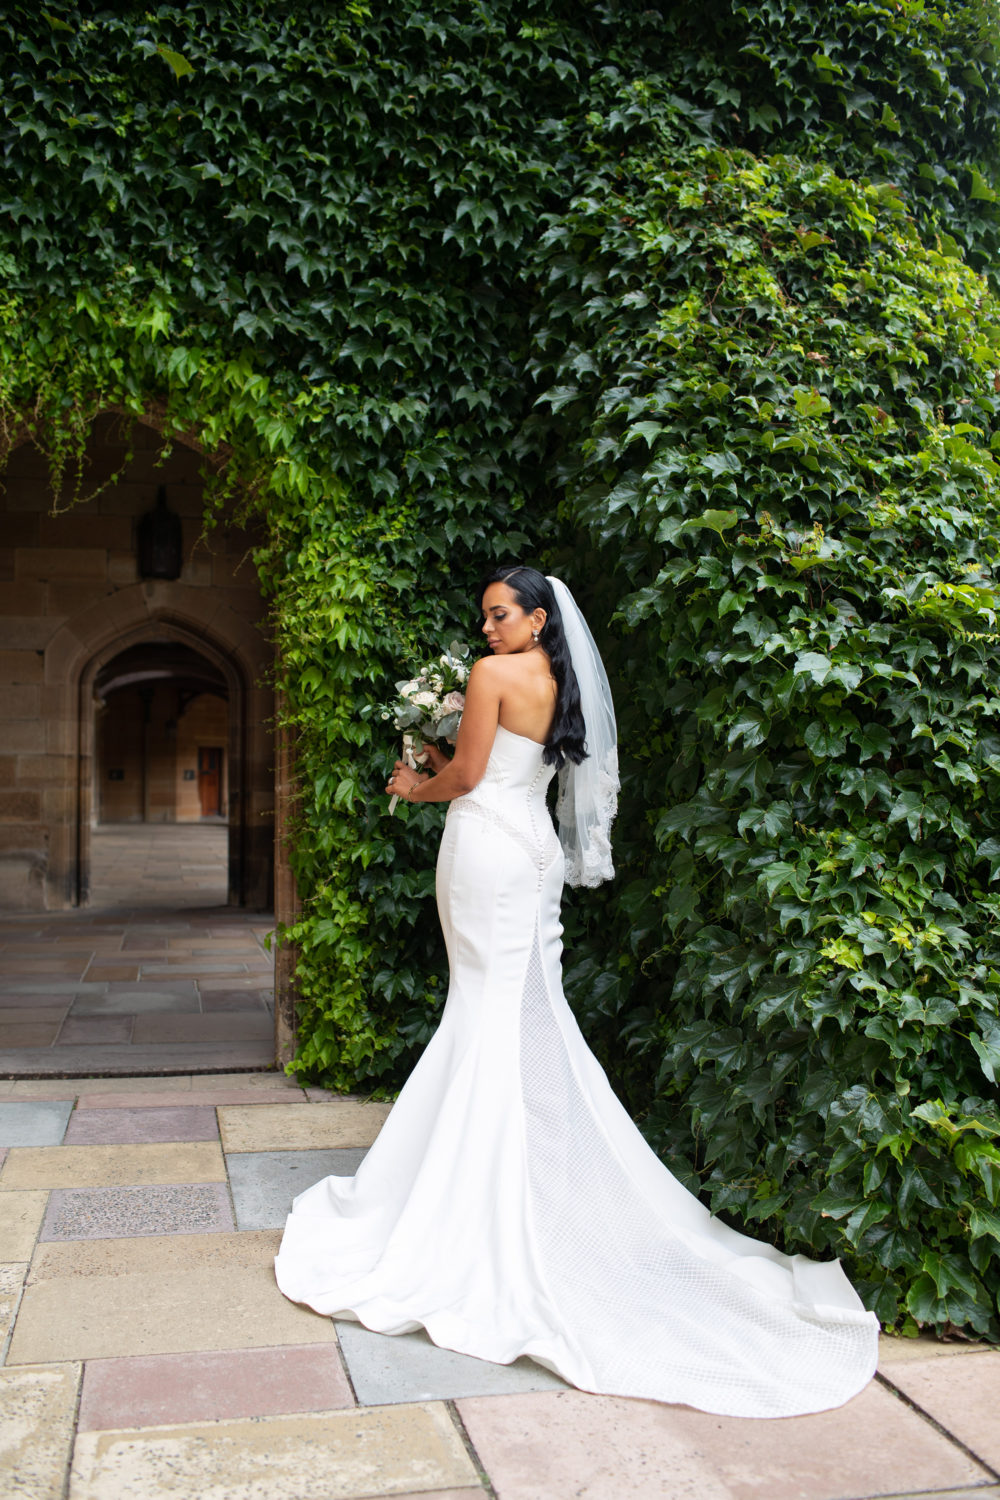 Love at first sight leads to Silvana and Aaron’s elegant greenery wedding